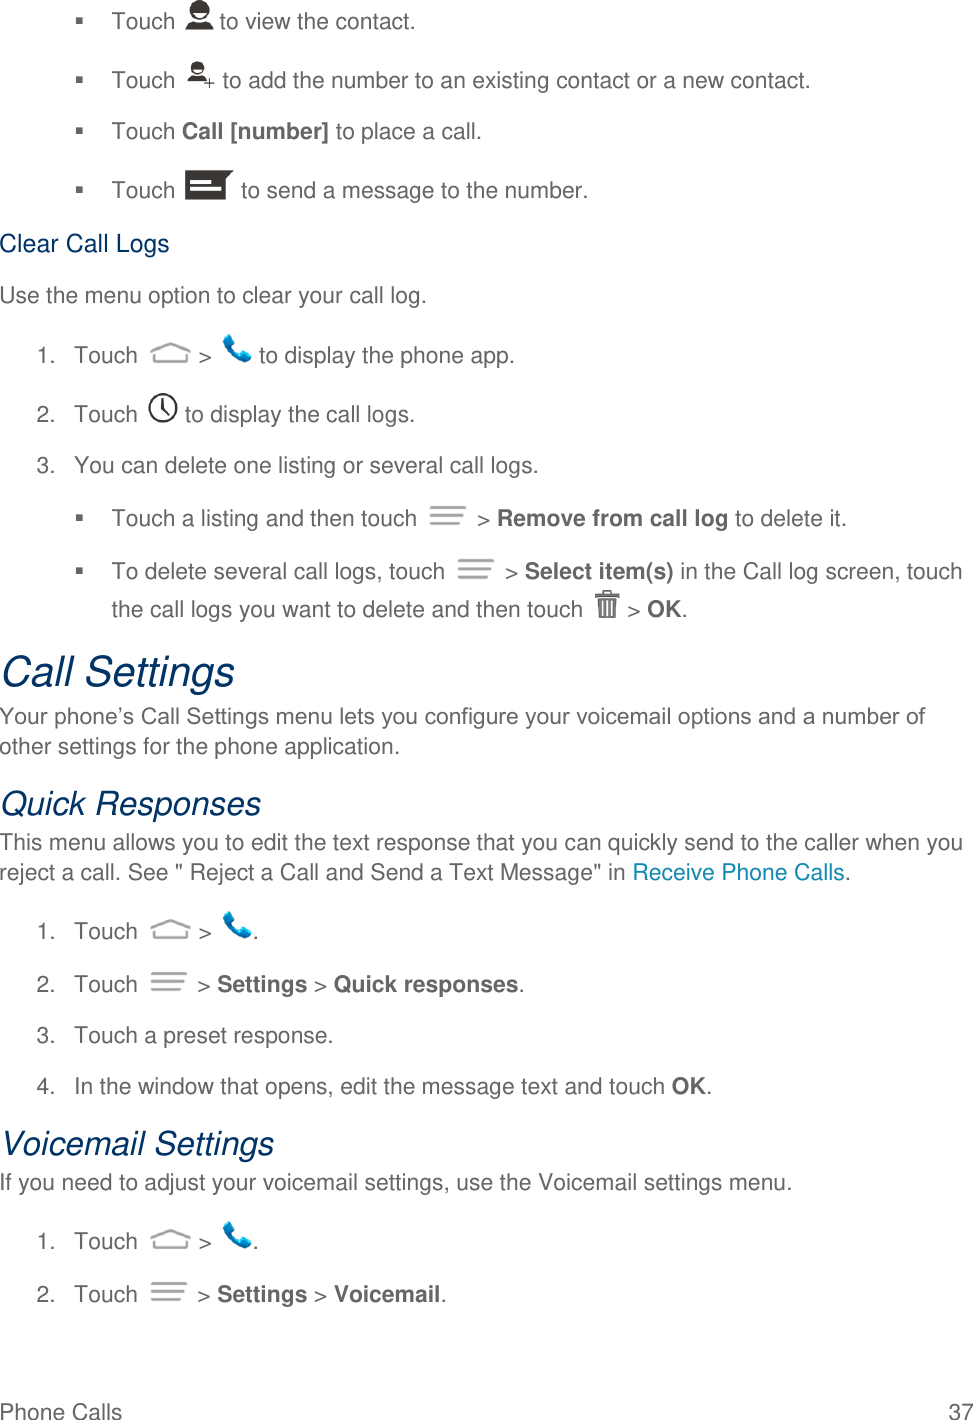 Phone Calls  37   Touch   to view the contact.   Touch   to add the number to an existing contact or a new contact.   Touch Call [number] to place a call.   Touch   to send a message to the number. Clear Call Logs Use the menu option to clear your call log. 1.  Touch   &gt;   to display the phone app. 2.  Touch   to display the call logs. 3.  You can delete one listing or several call logs.   Touch a listing and then touch   &gt; Remove from call log to delete it.   To delete several call logs, touch   &gt; Select item(s) in the Call log screen, touch the call logs you want to delete and then touch   &gt; OK. Call Settings Your phone’s Call Settings menu lets you configure your voicemail options and a number of other settings for the phone application. Quick Responses This menu allows you to edit the text response that you can quickly send to the caller when you reject a call. See &quot; Reject a Call and Send a Text Message&quot; in Receive Phone Calls. 1.  Touch   &gt;  . 2.  Touch   &gt; Settings &gt; Quick responses. 3.  Touch a preset response. 4.  In the window that opens, edit the message text and touch OK. Voicemail Settings If you need to adjust your voicemail settings, use the Voicemail settings menu. 1.  Touch   &gt;  . 2.  Touch   &gt; Settings &gt; Voicemail. 